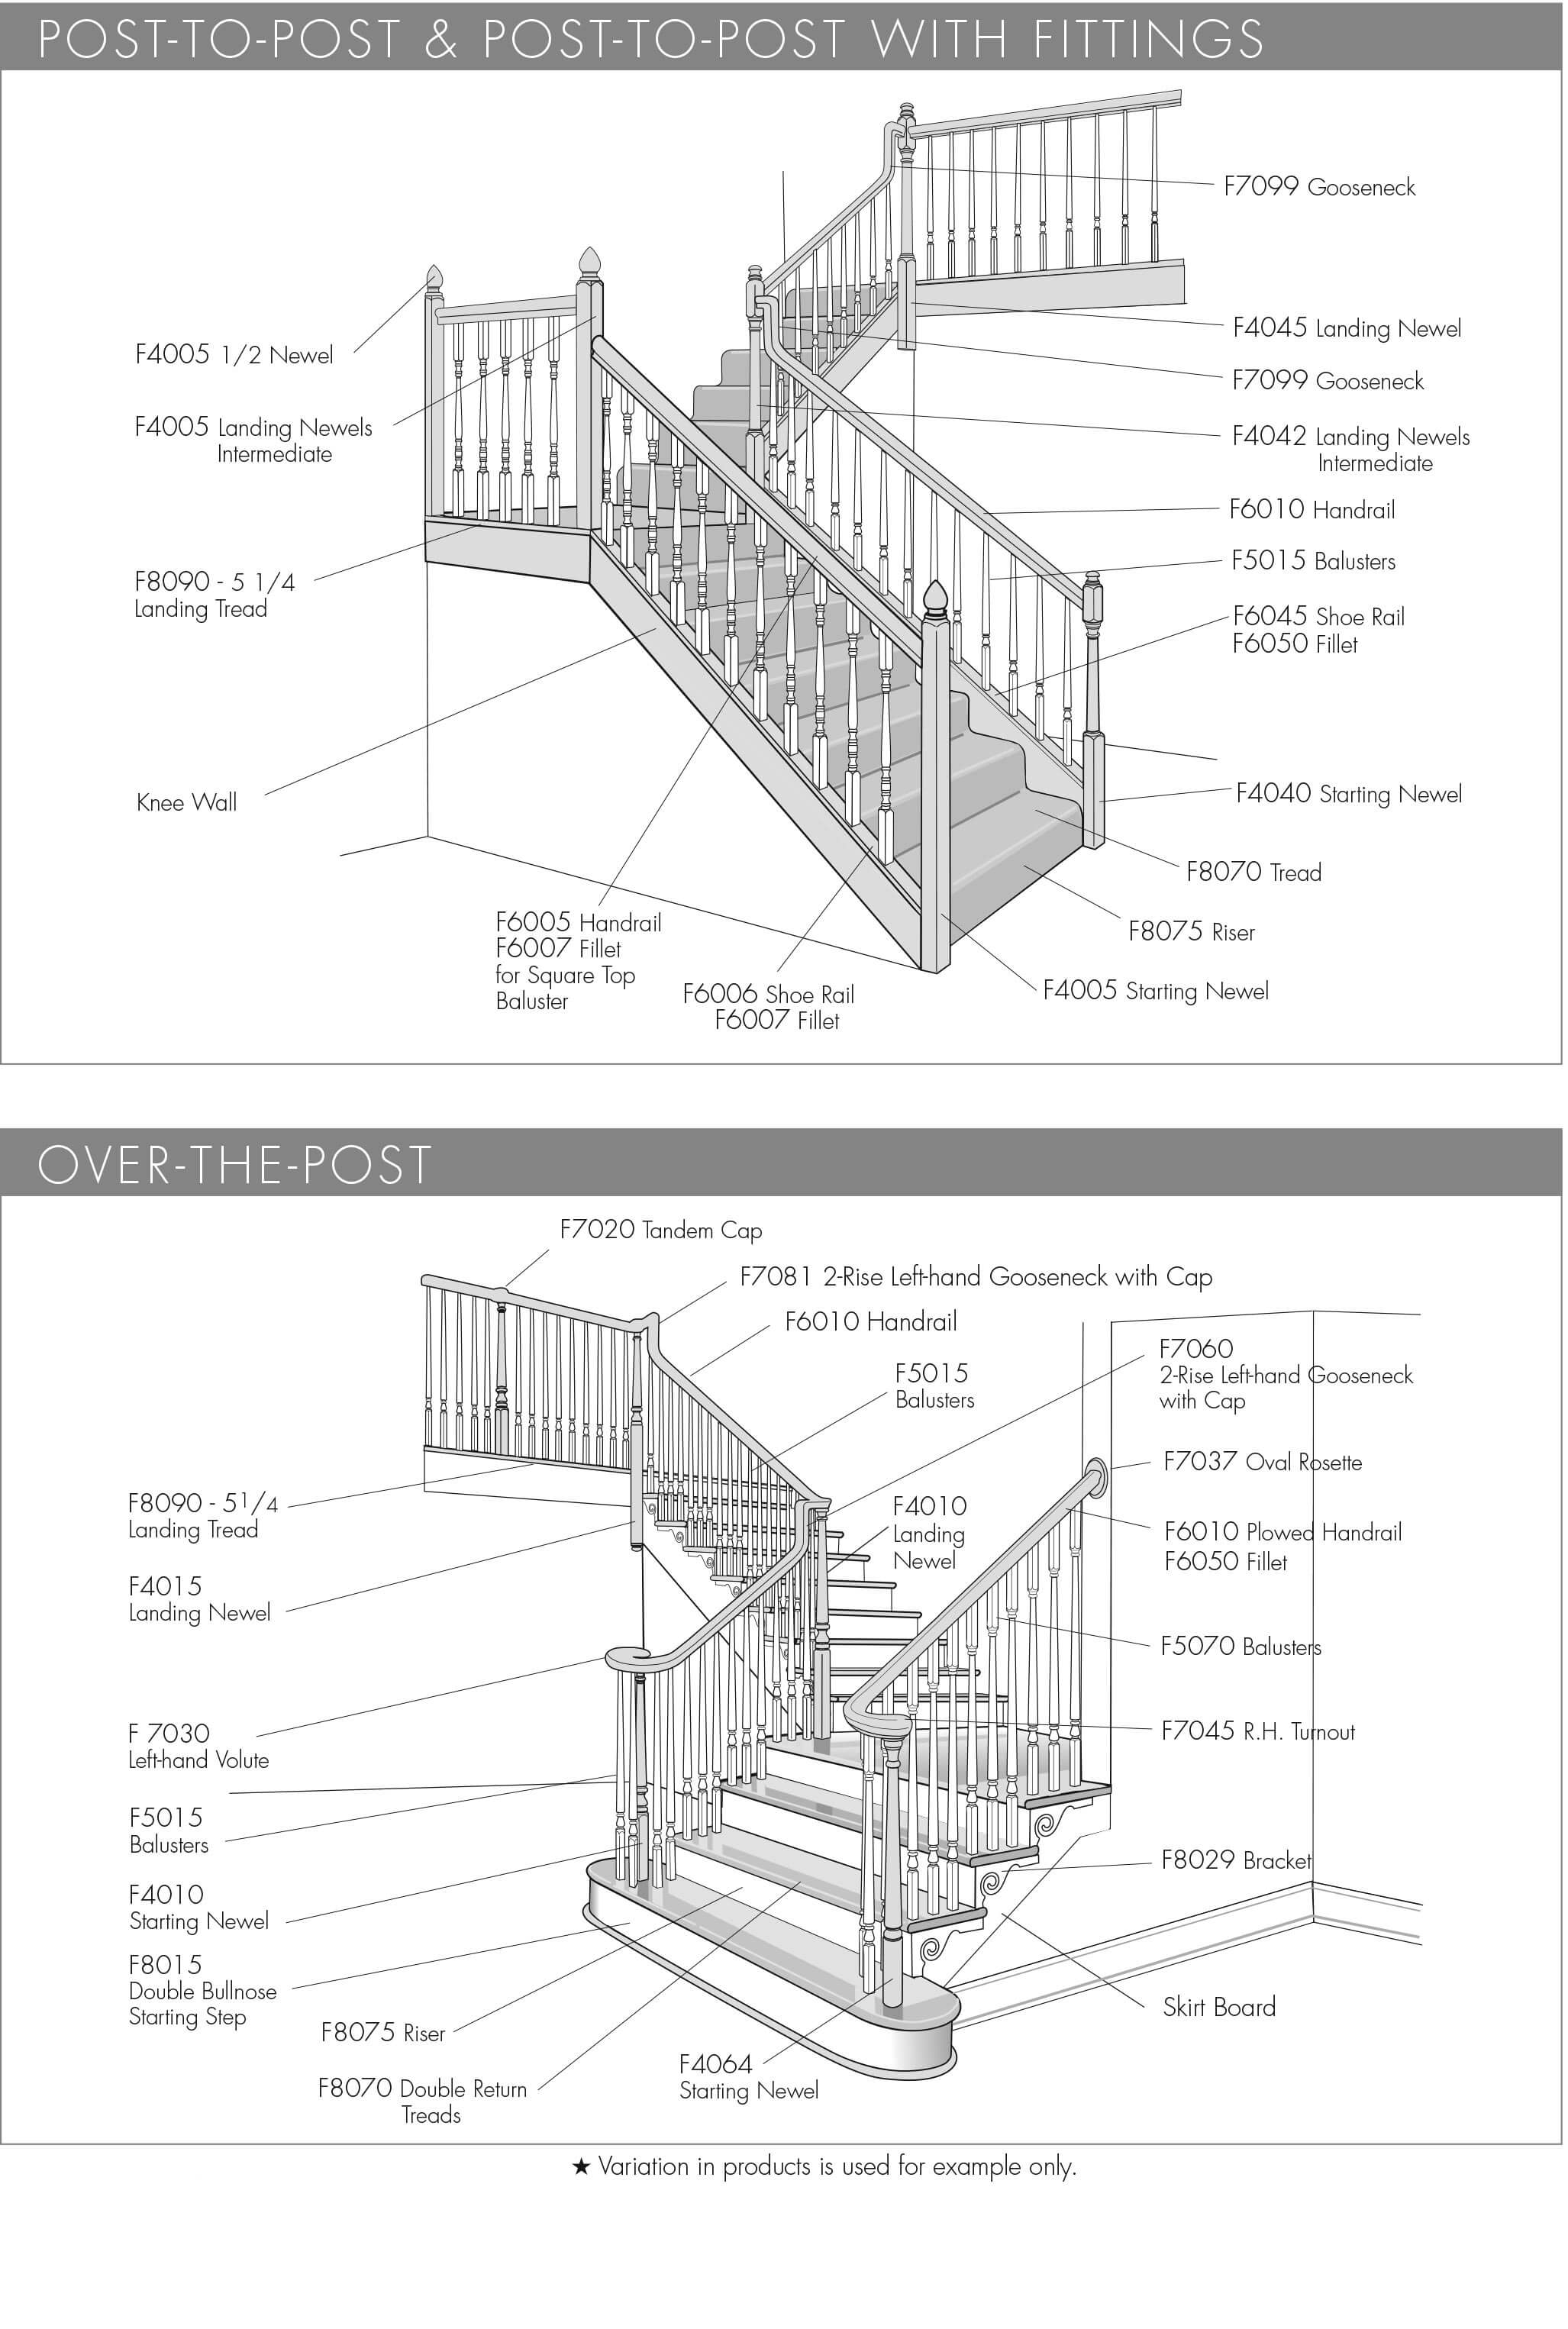 Stairpart Terminology - Useful Words To Know